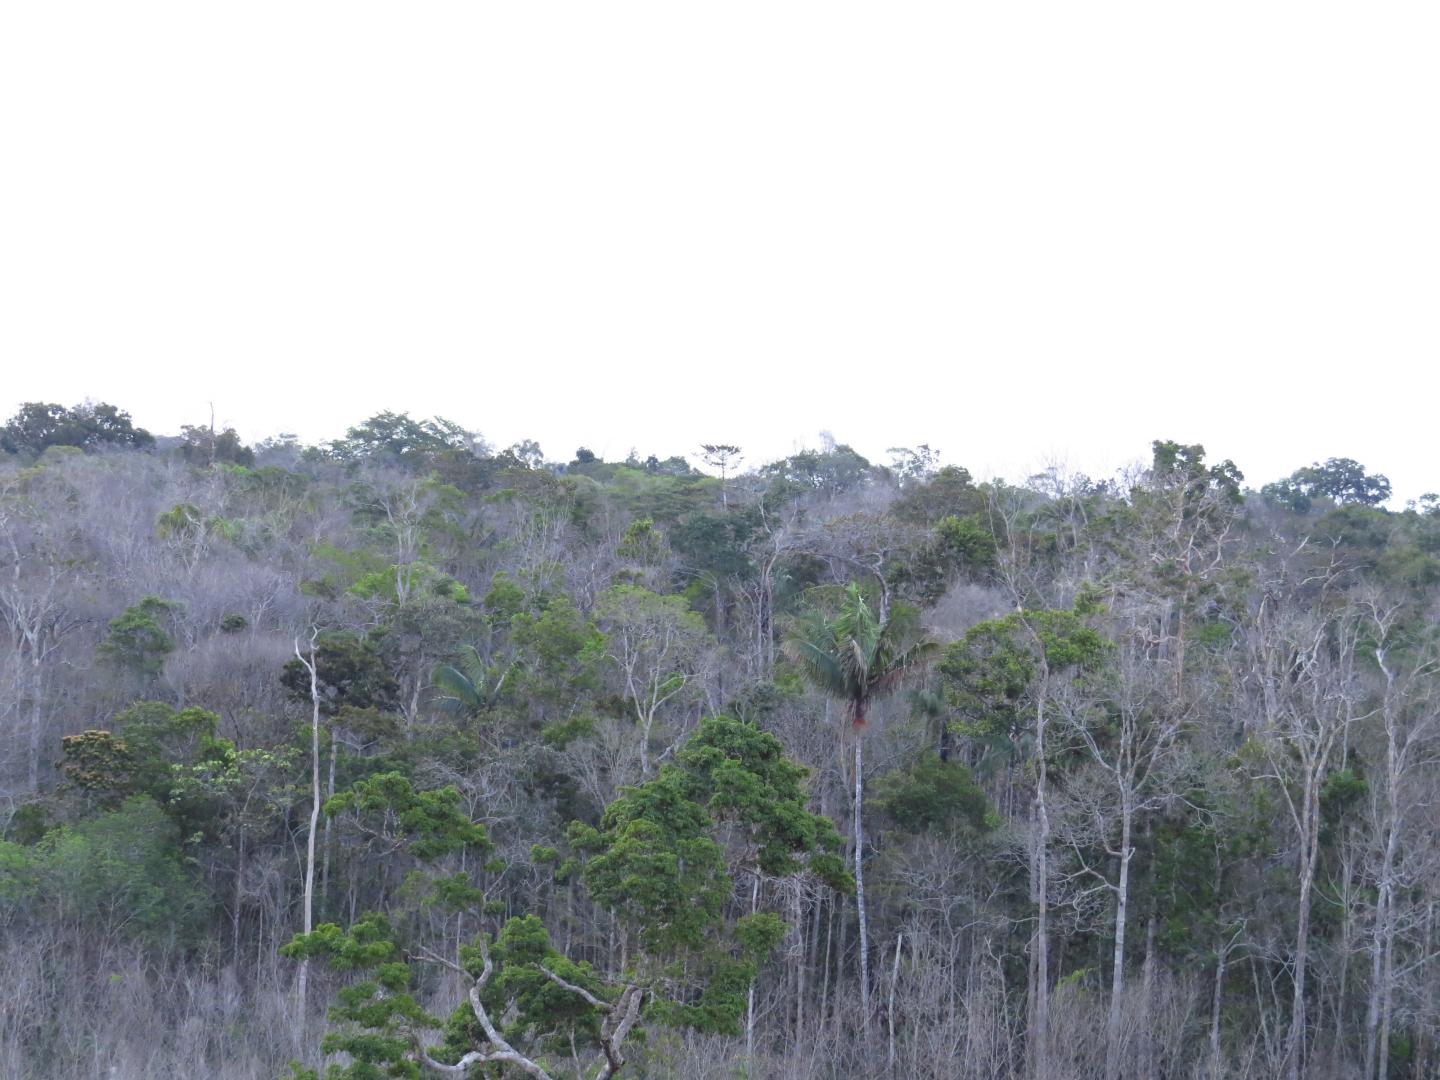 Dying forest in Central Amazon